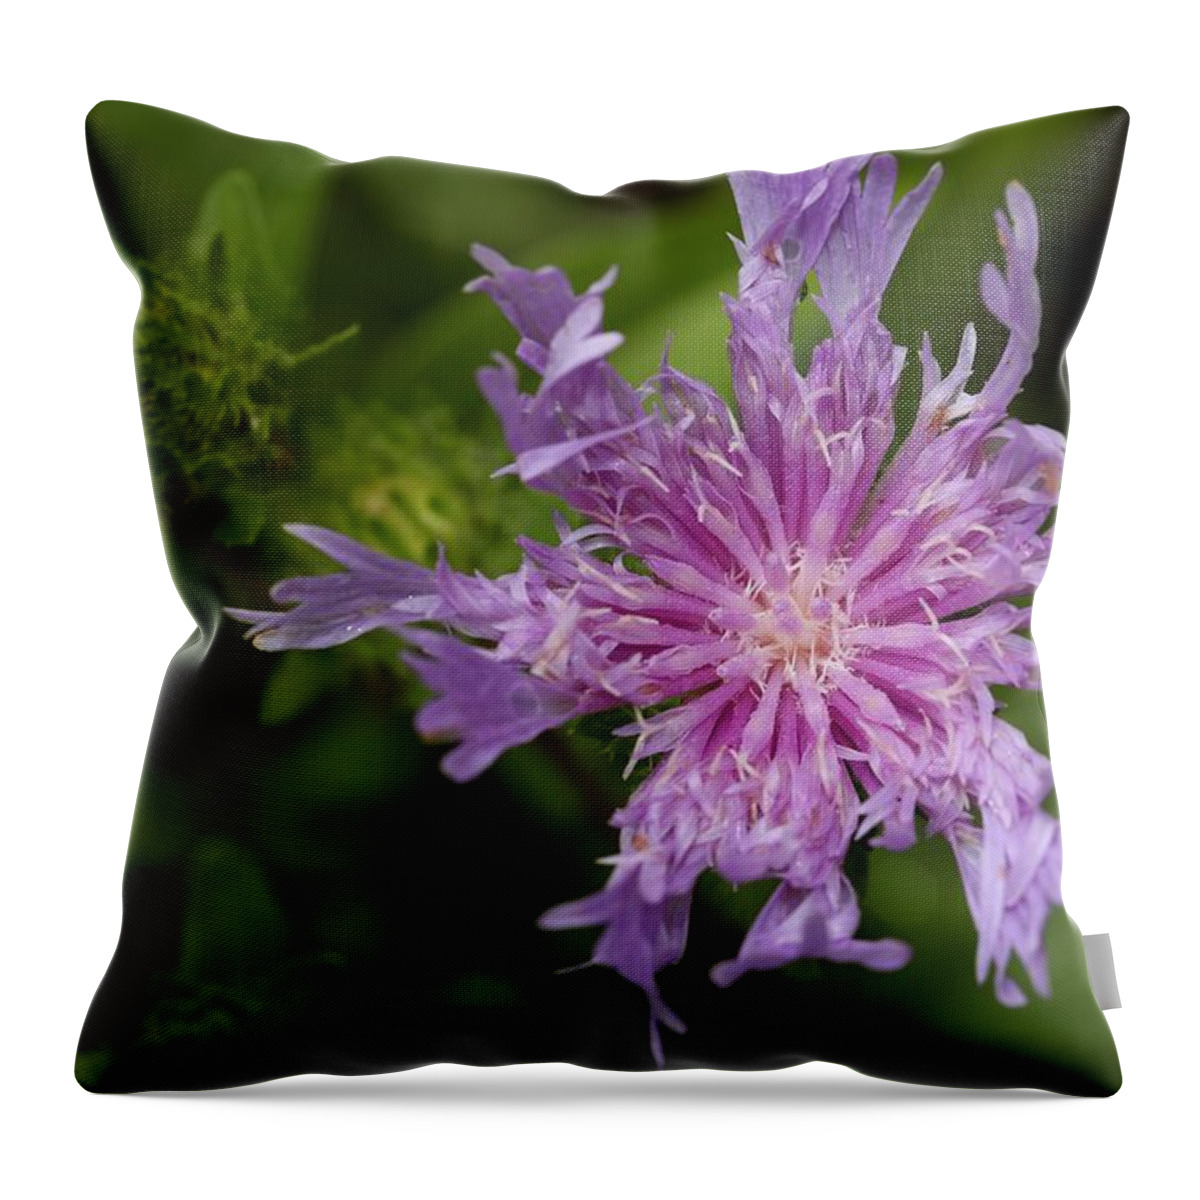 Stoke’s Aster Throw Pillow featuring the photograph Stoke's Aster Flower 3 by Mingming Jiang